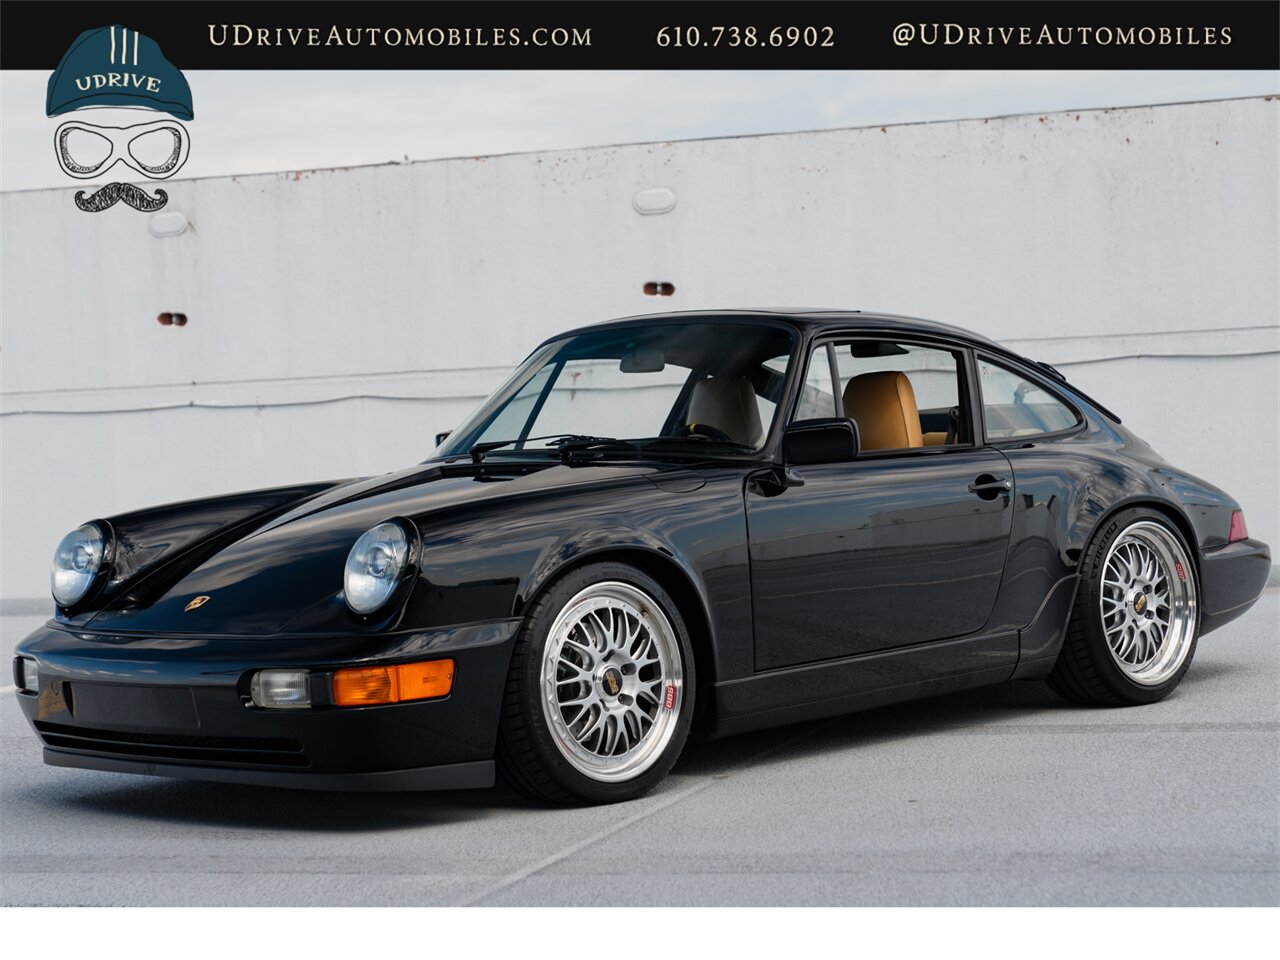 1989 Porsche 911 Carrera 4  964 C4 5 Speed Manual $63k Recent Service and Upgrades - Photo 9 - West Chester, PA 19382